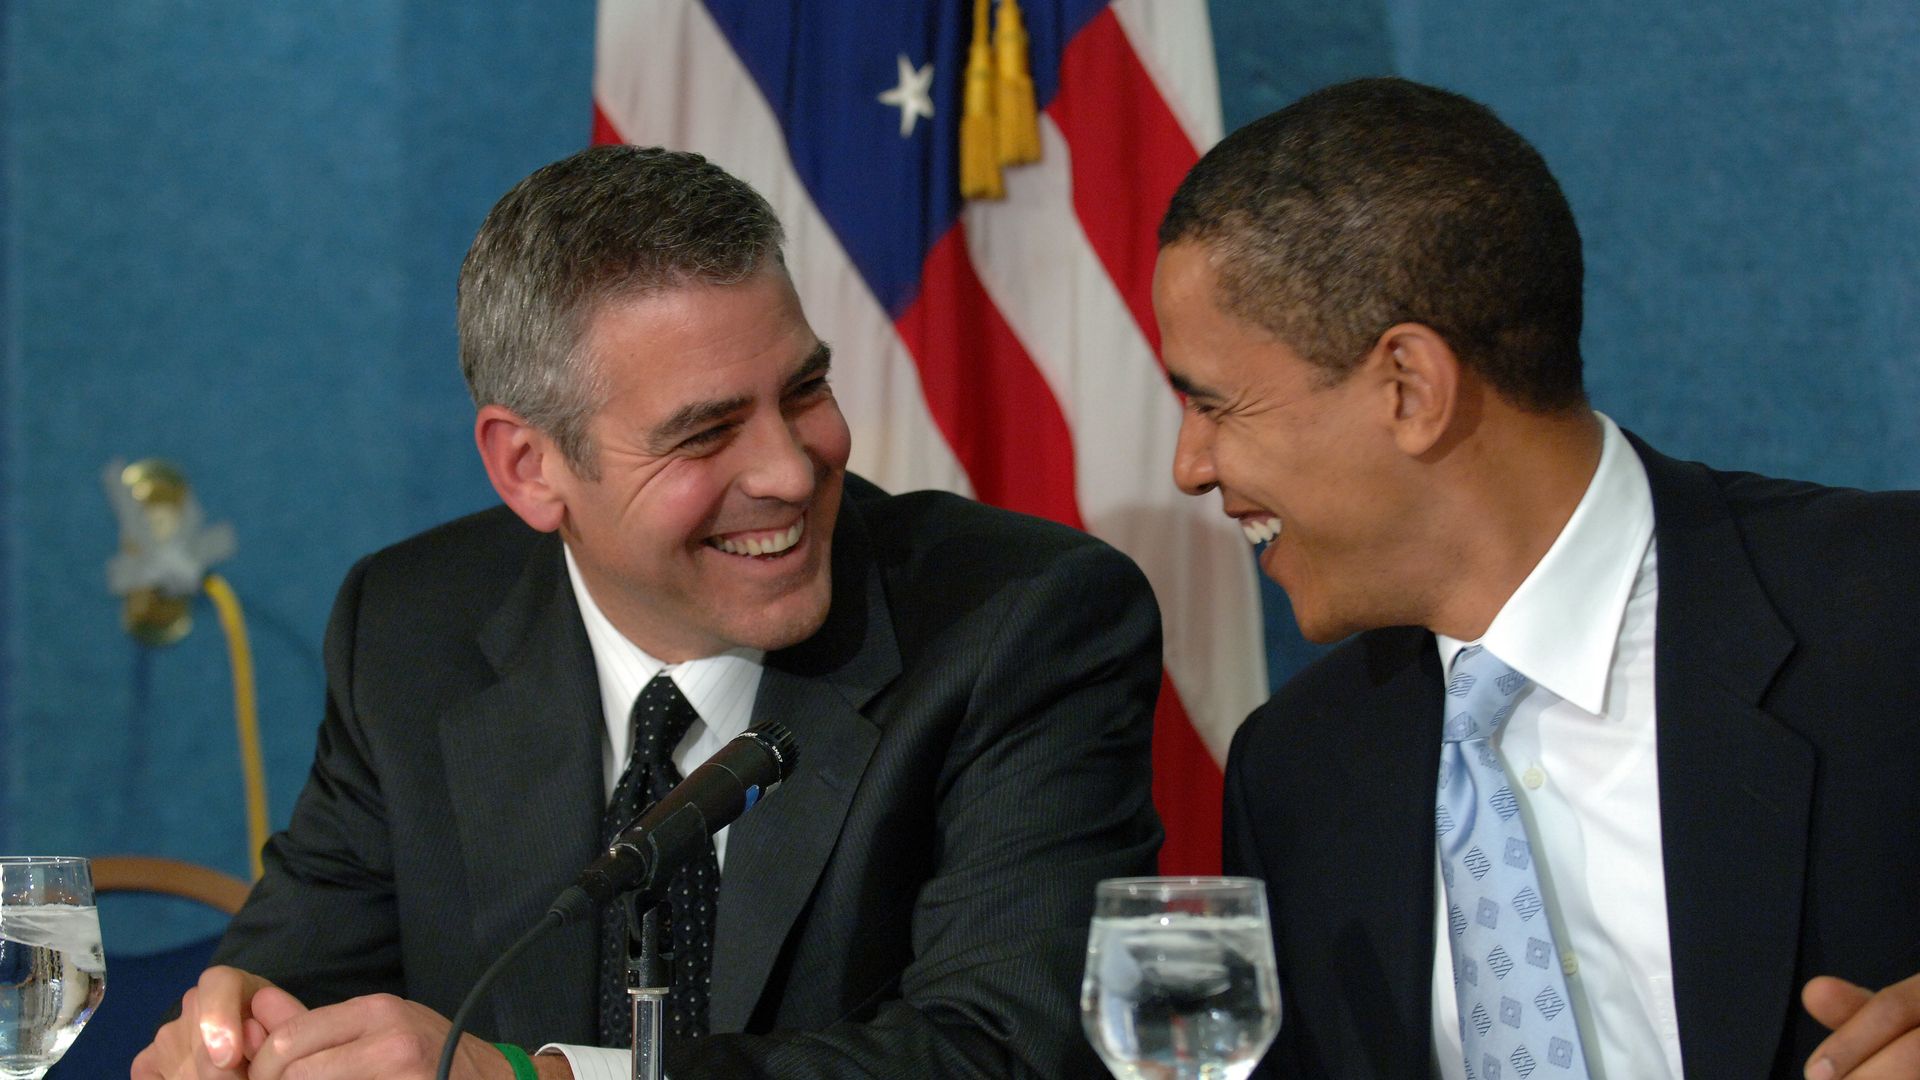 George Clooney (L) and Senator Barack Obama (D - Illinois) during a press conference in Washington DC, where Clooney spoke about his recent visit to the Darfur region of Sudan, on April 27, 2006